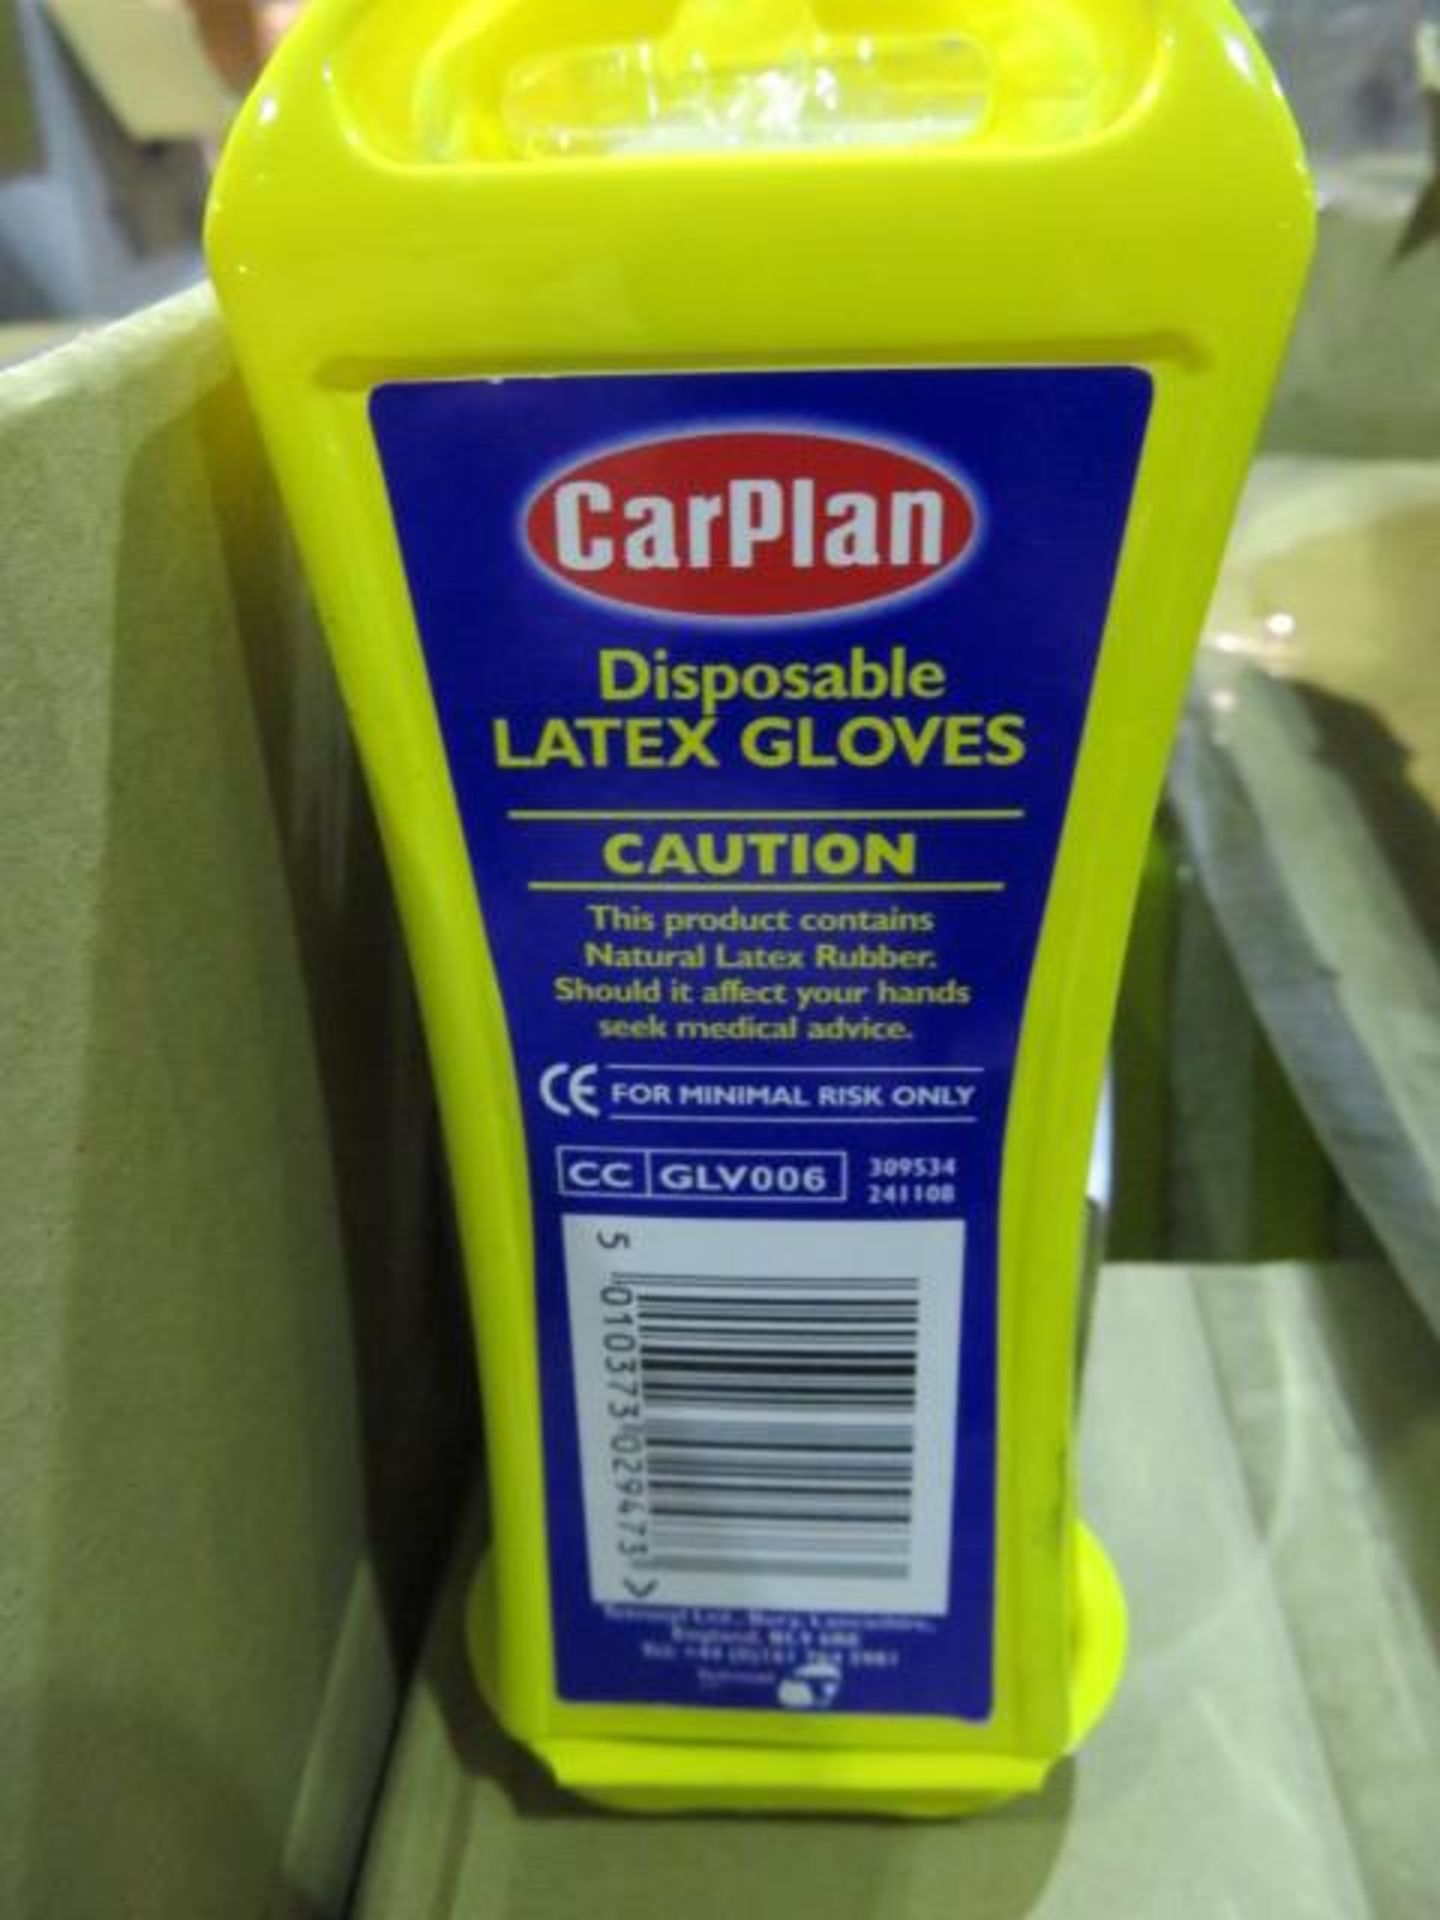 (314) PALLET TO CONTAIN 648 x CARPLAN 6 PAIRS OF DISPOSABLE LATEX GLOVES. RRP £2.99 PER PACK. ... - Image 3 of 3